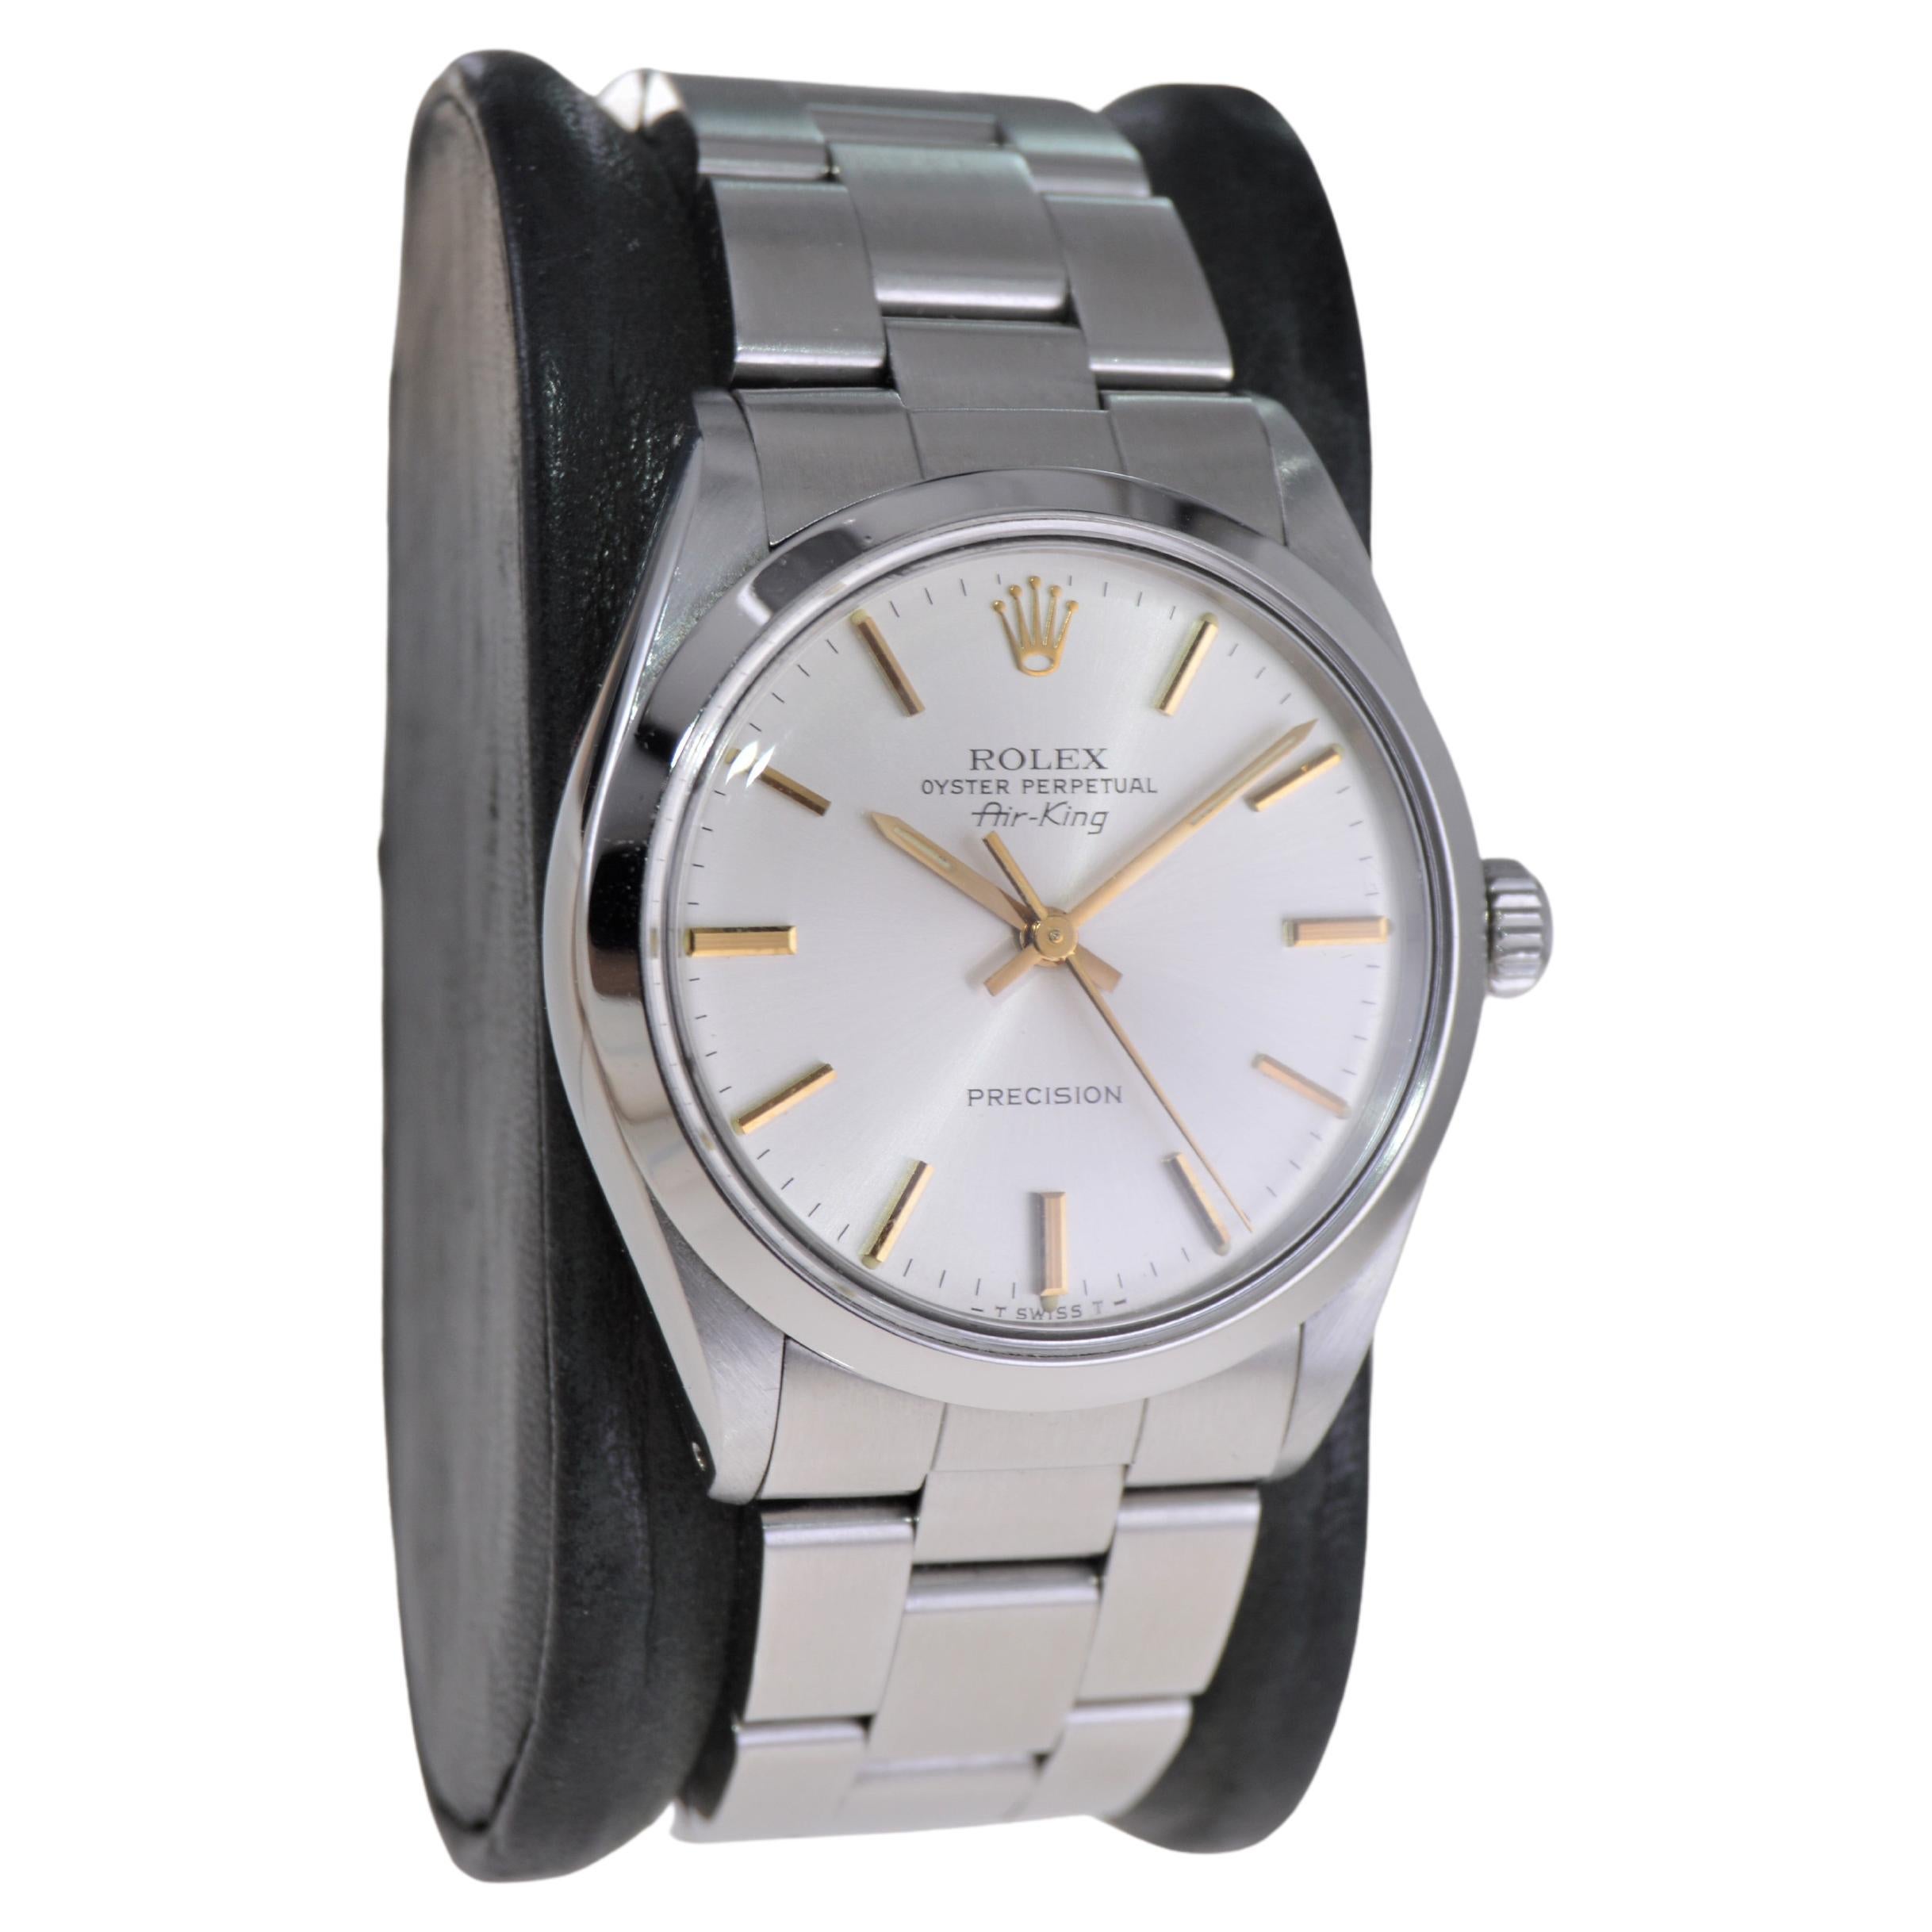 FACTORY / HOUSE: Rolex Watch Company
STYLE / REFERENCE: Oyster Perpetual Air King / Reference 5500/1002
METAL / MATERIAL: Stainless Steel
CIRCA / YEAR: 1989
DIMENSIONS / SIZE: Length 40mm x Diameter 34mm
MOVEMENT / CALIBER: Perpetual Winding /